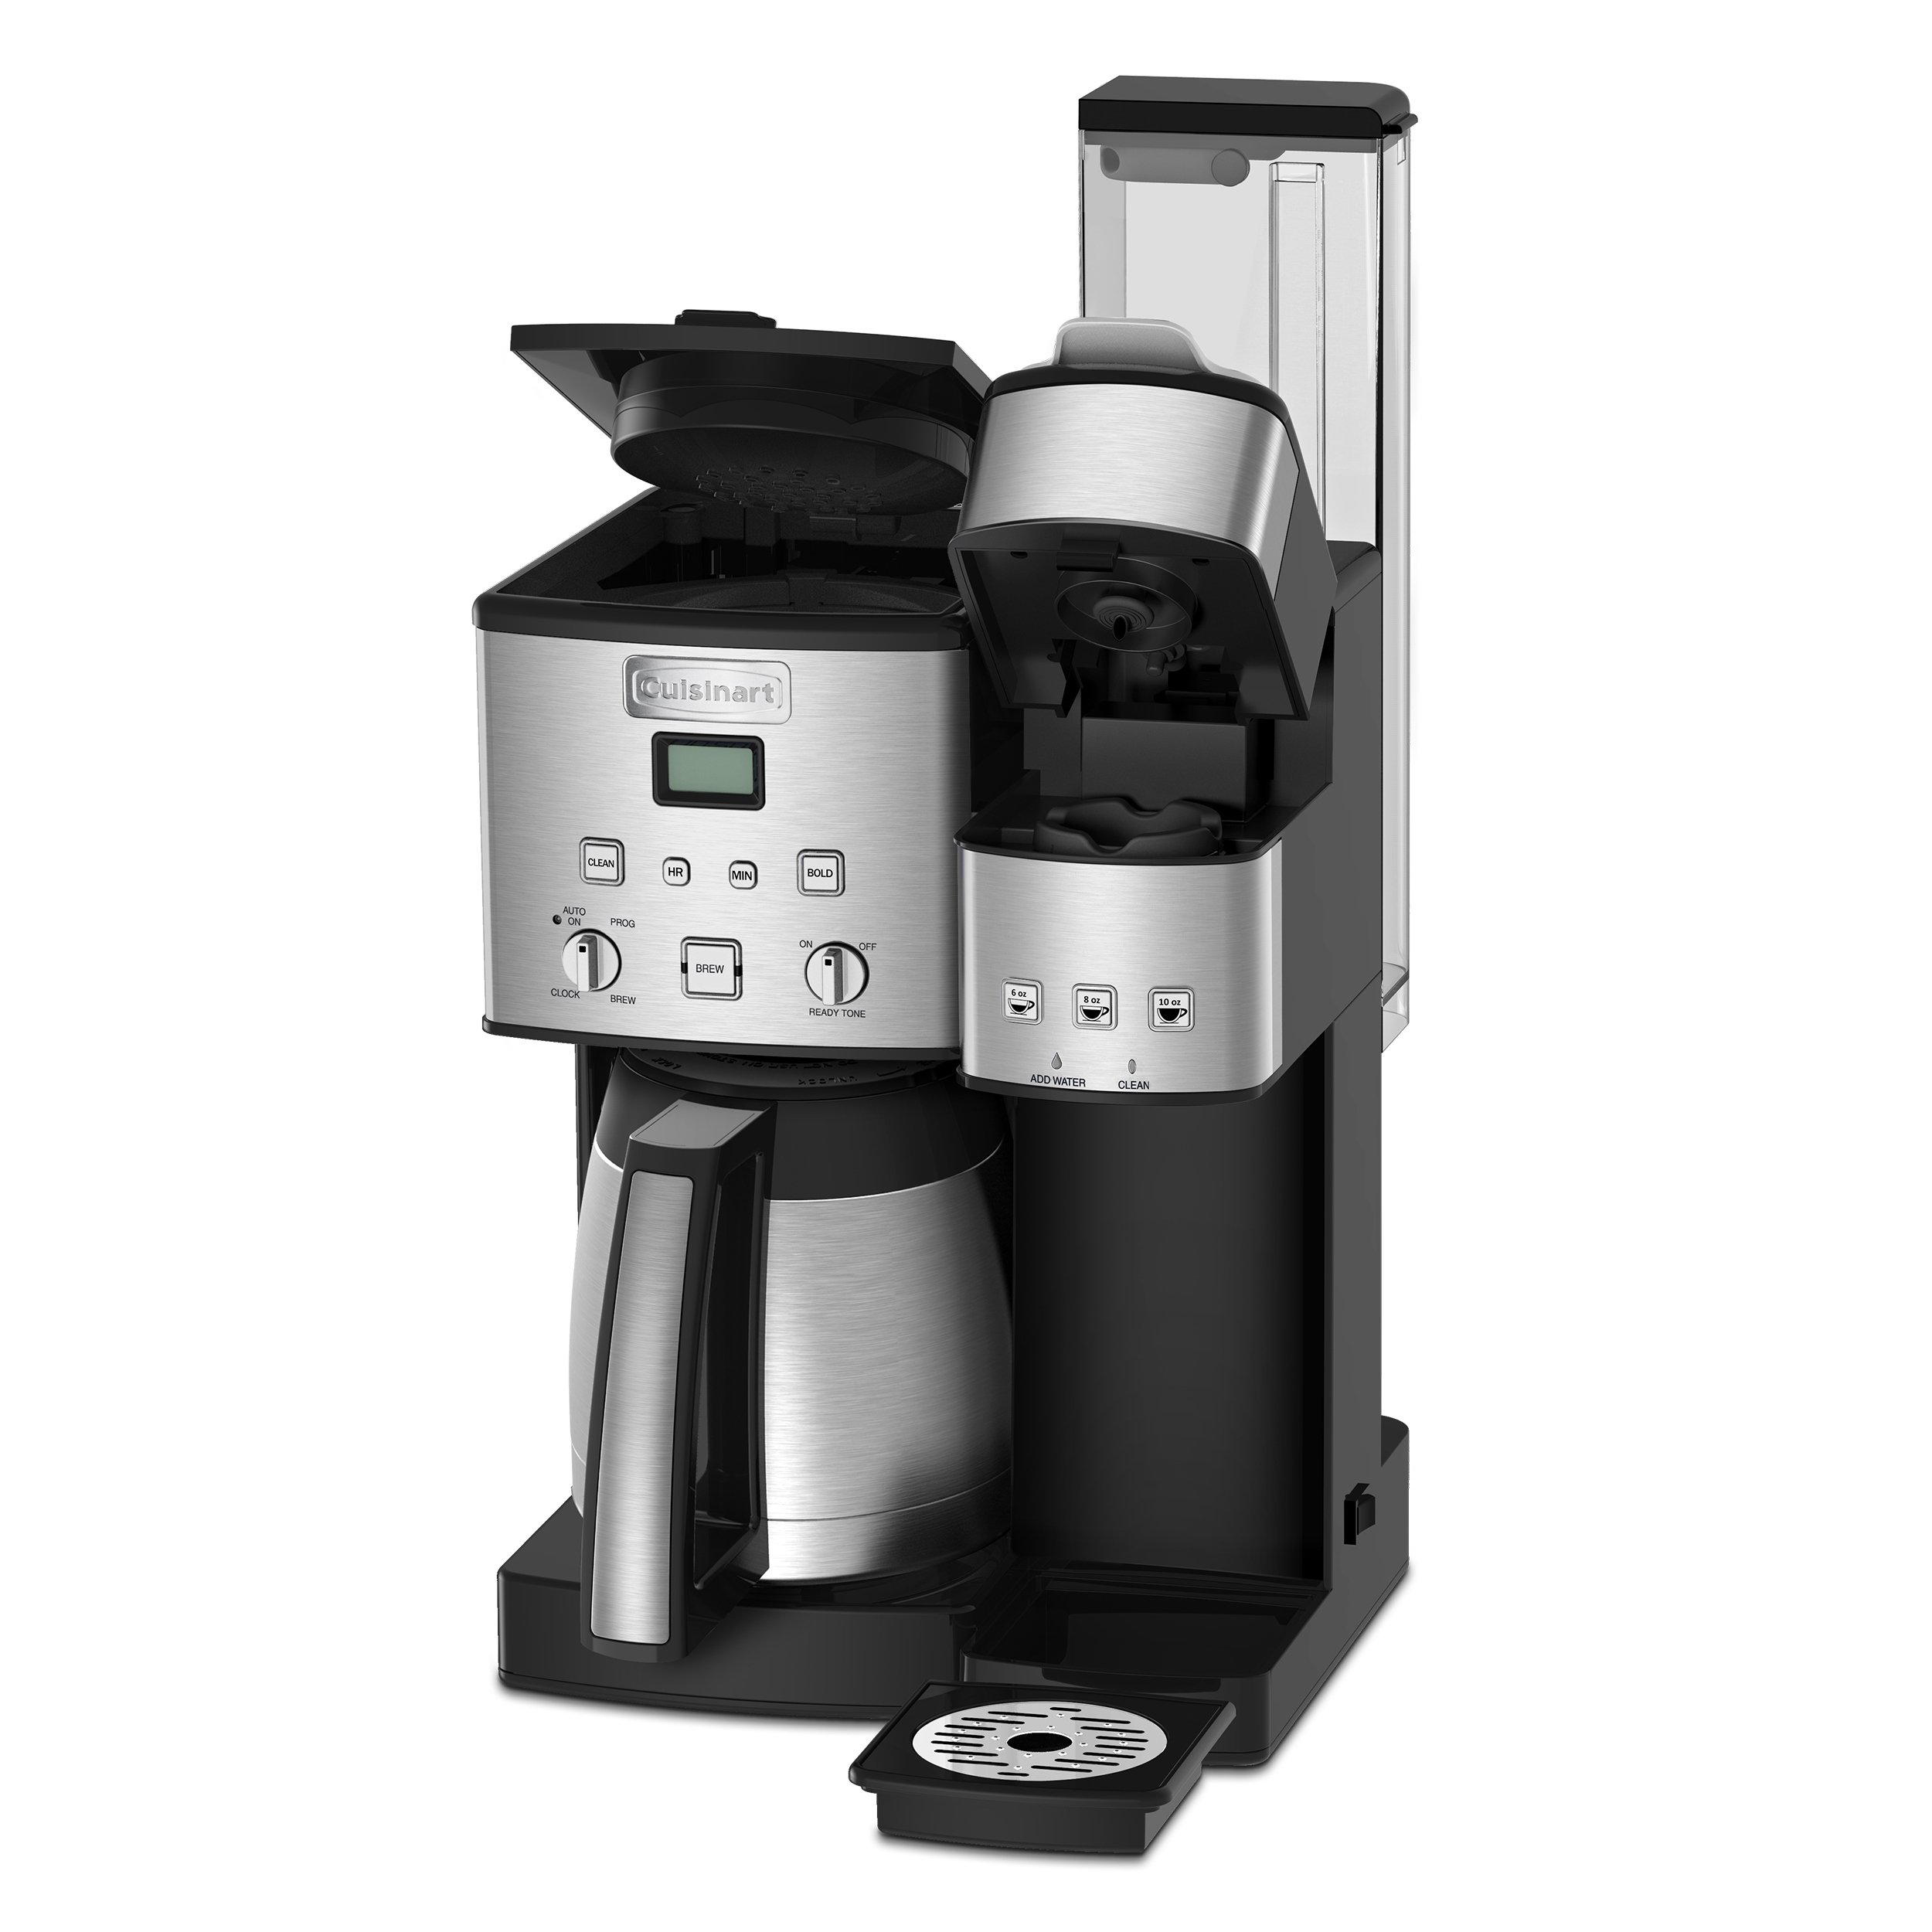  Cuisinart Stainless Steel Coffee Center Combo Coffee Maker  (Black) Bundle with Colombian Roast Single Serve KCup and Stainless Steel  Tumbler (3 Items): Home & Kitchen